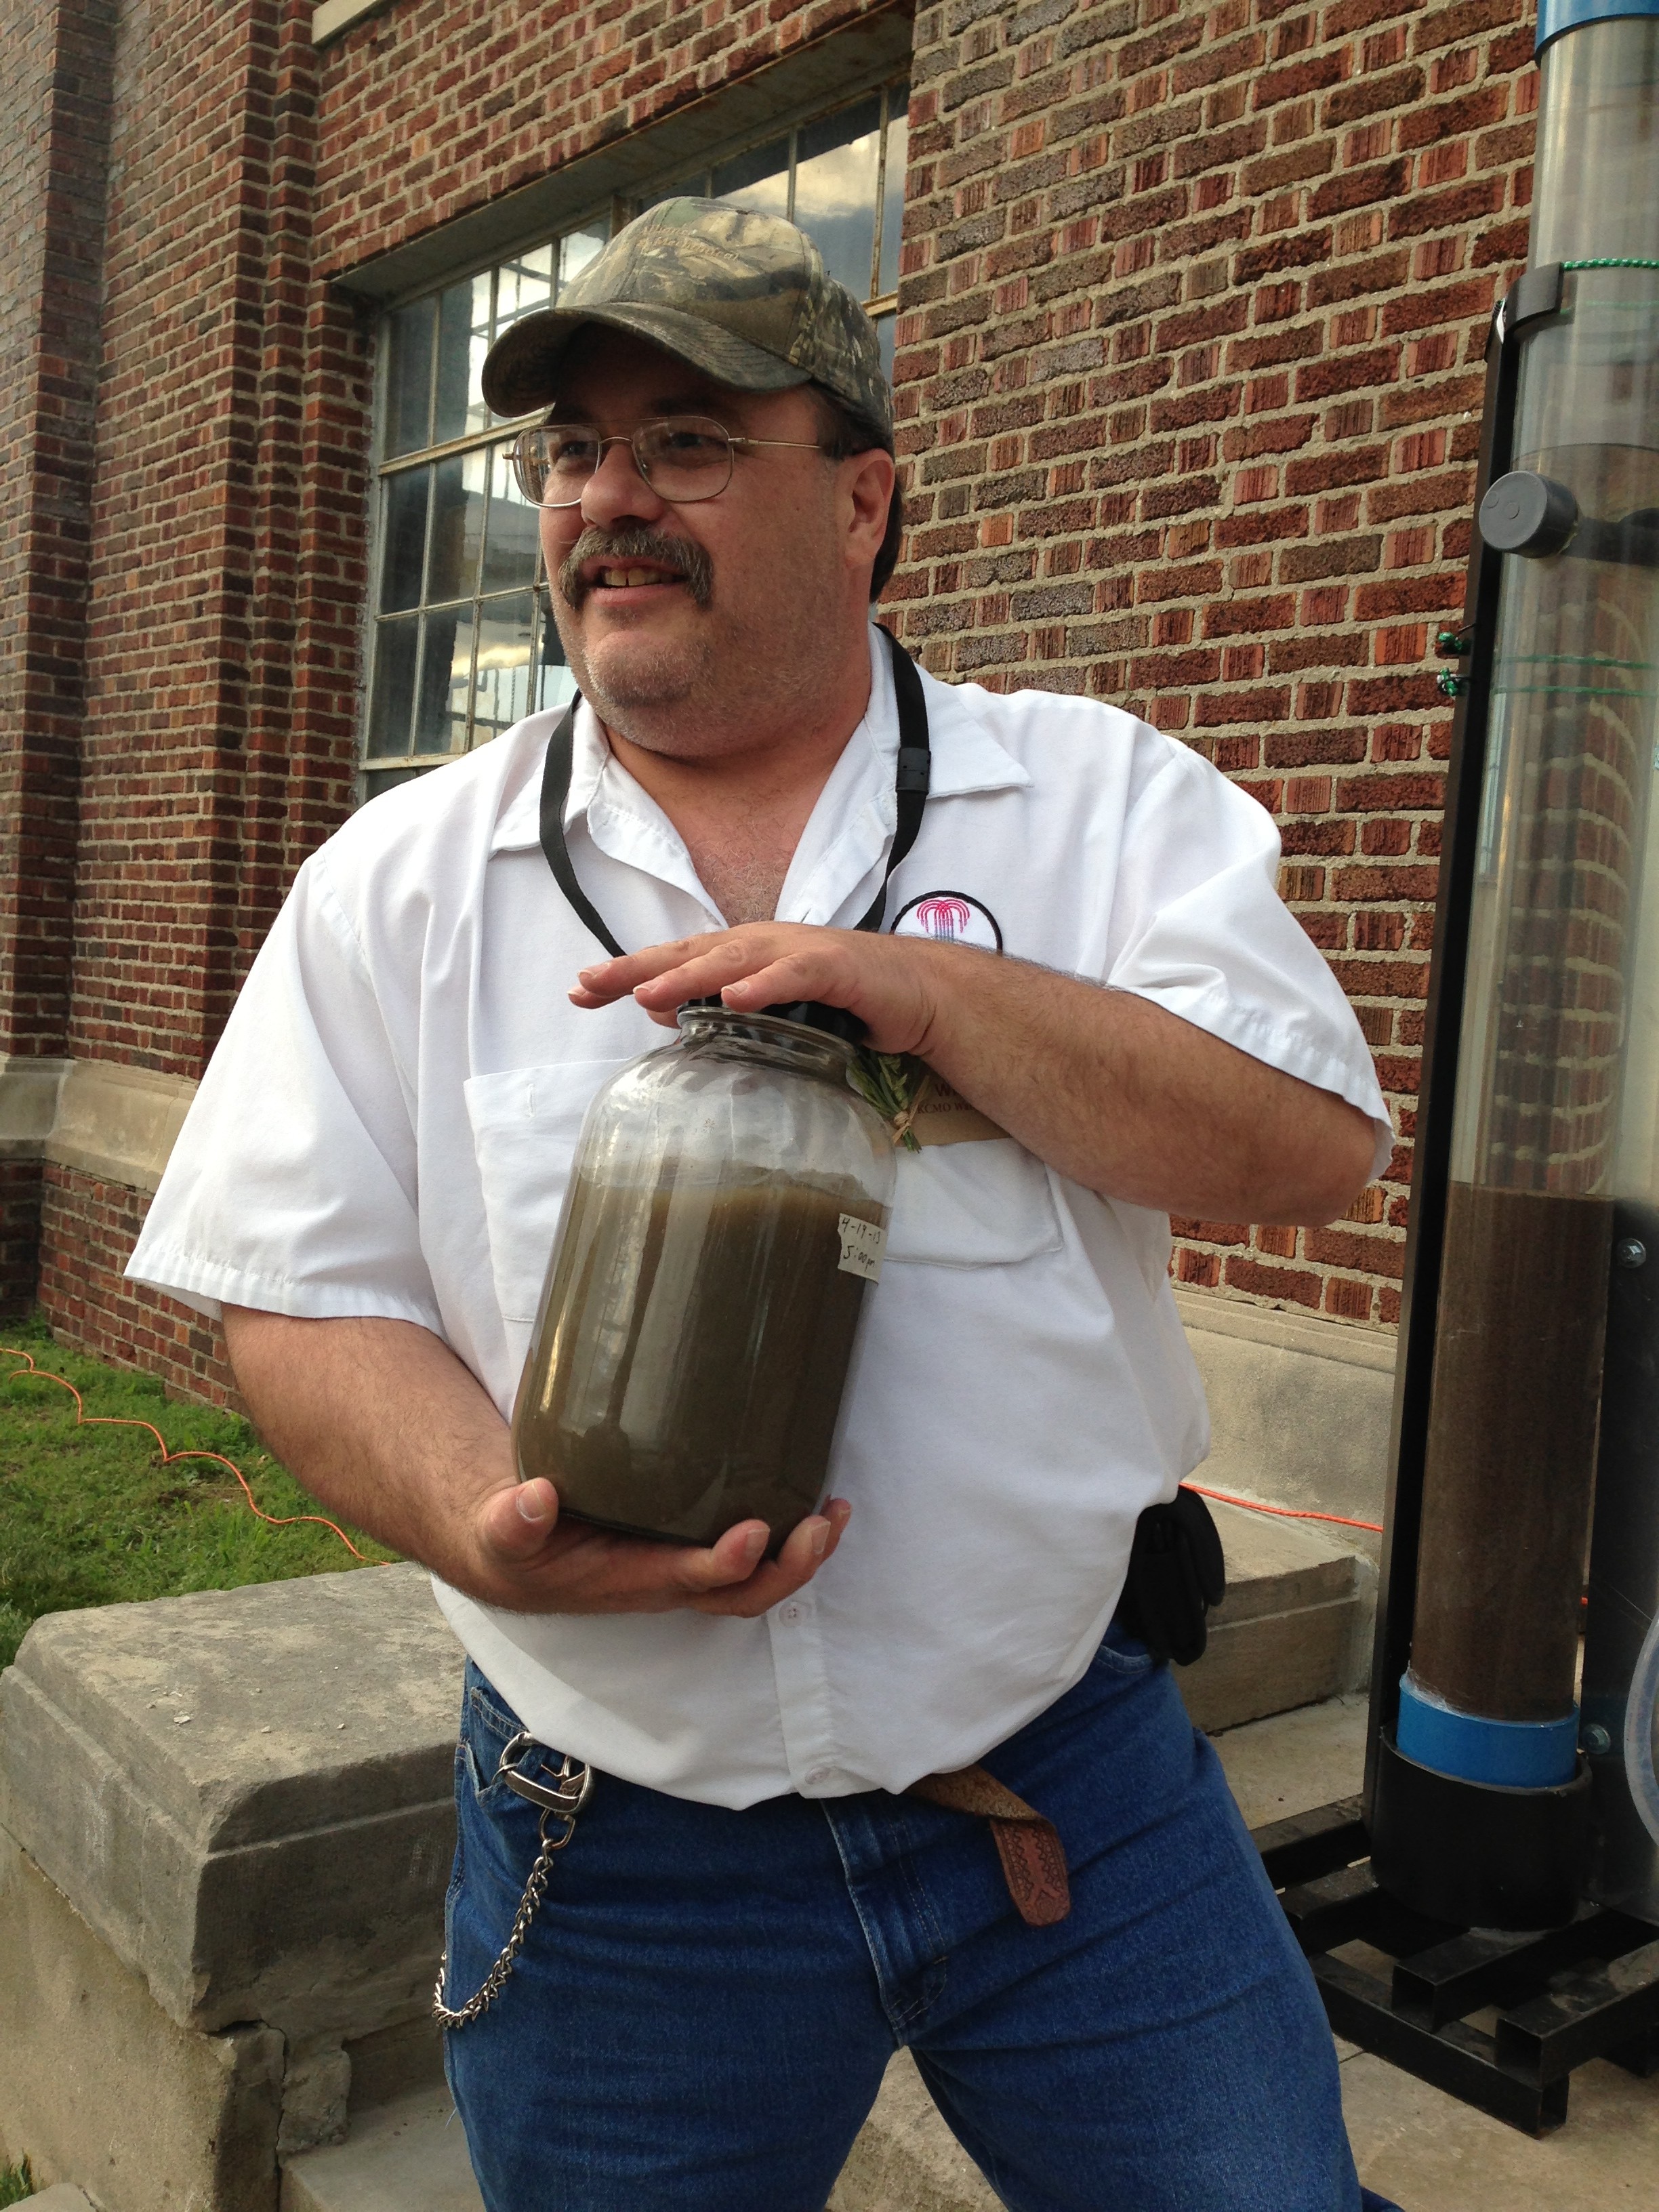 Keith, with the KCMO Water Services Department, shows us what the water we're drinking today looked like one month ago.